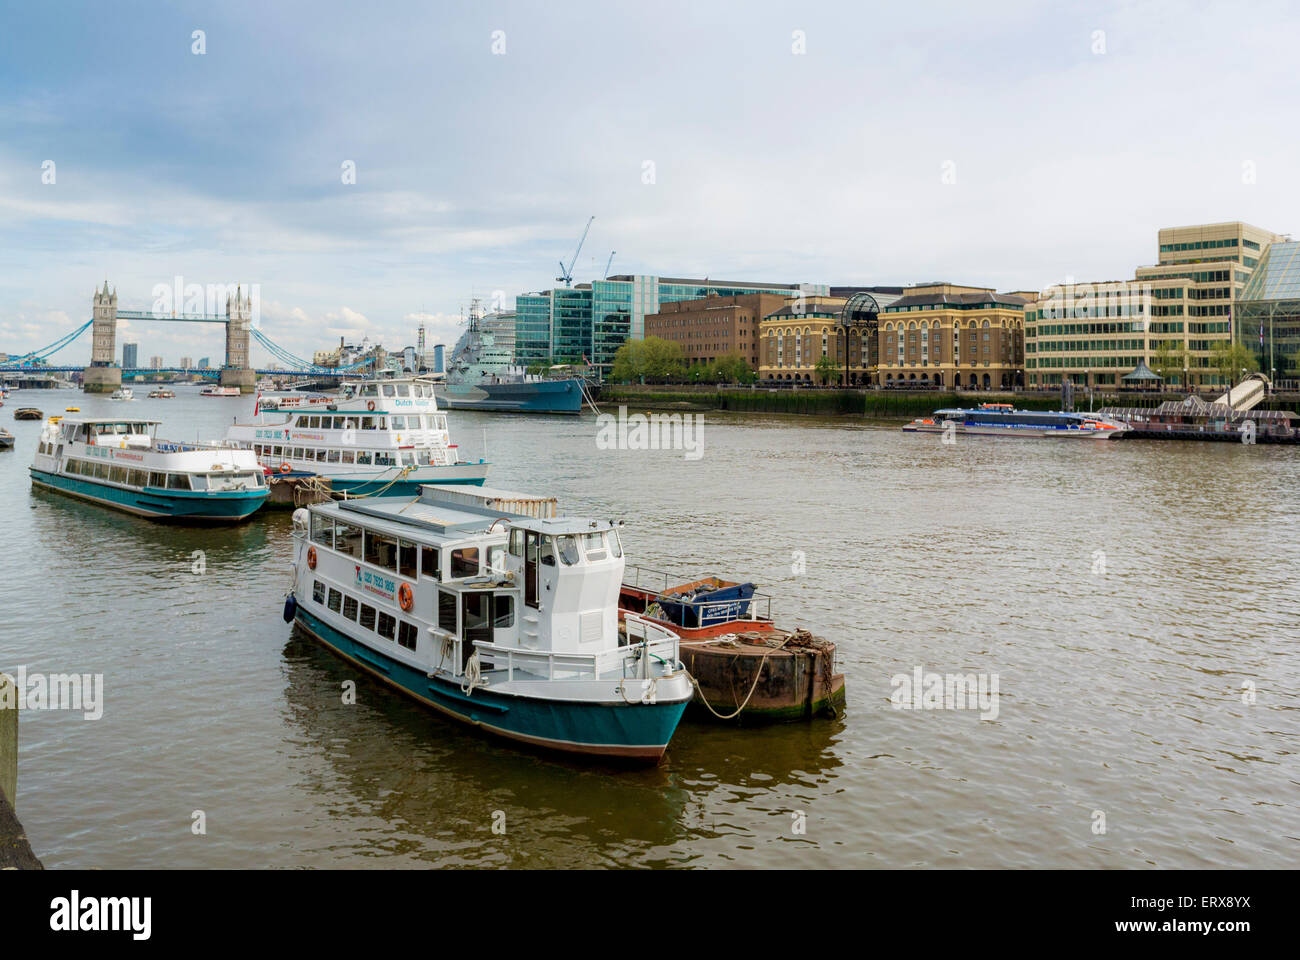 Boats on River Thames with Tower Bridge in Background, London, UK. Stock Photo